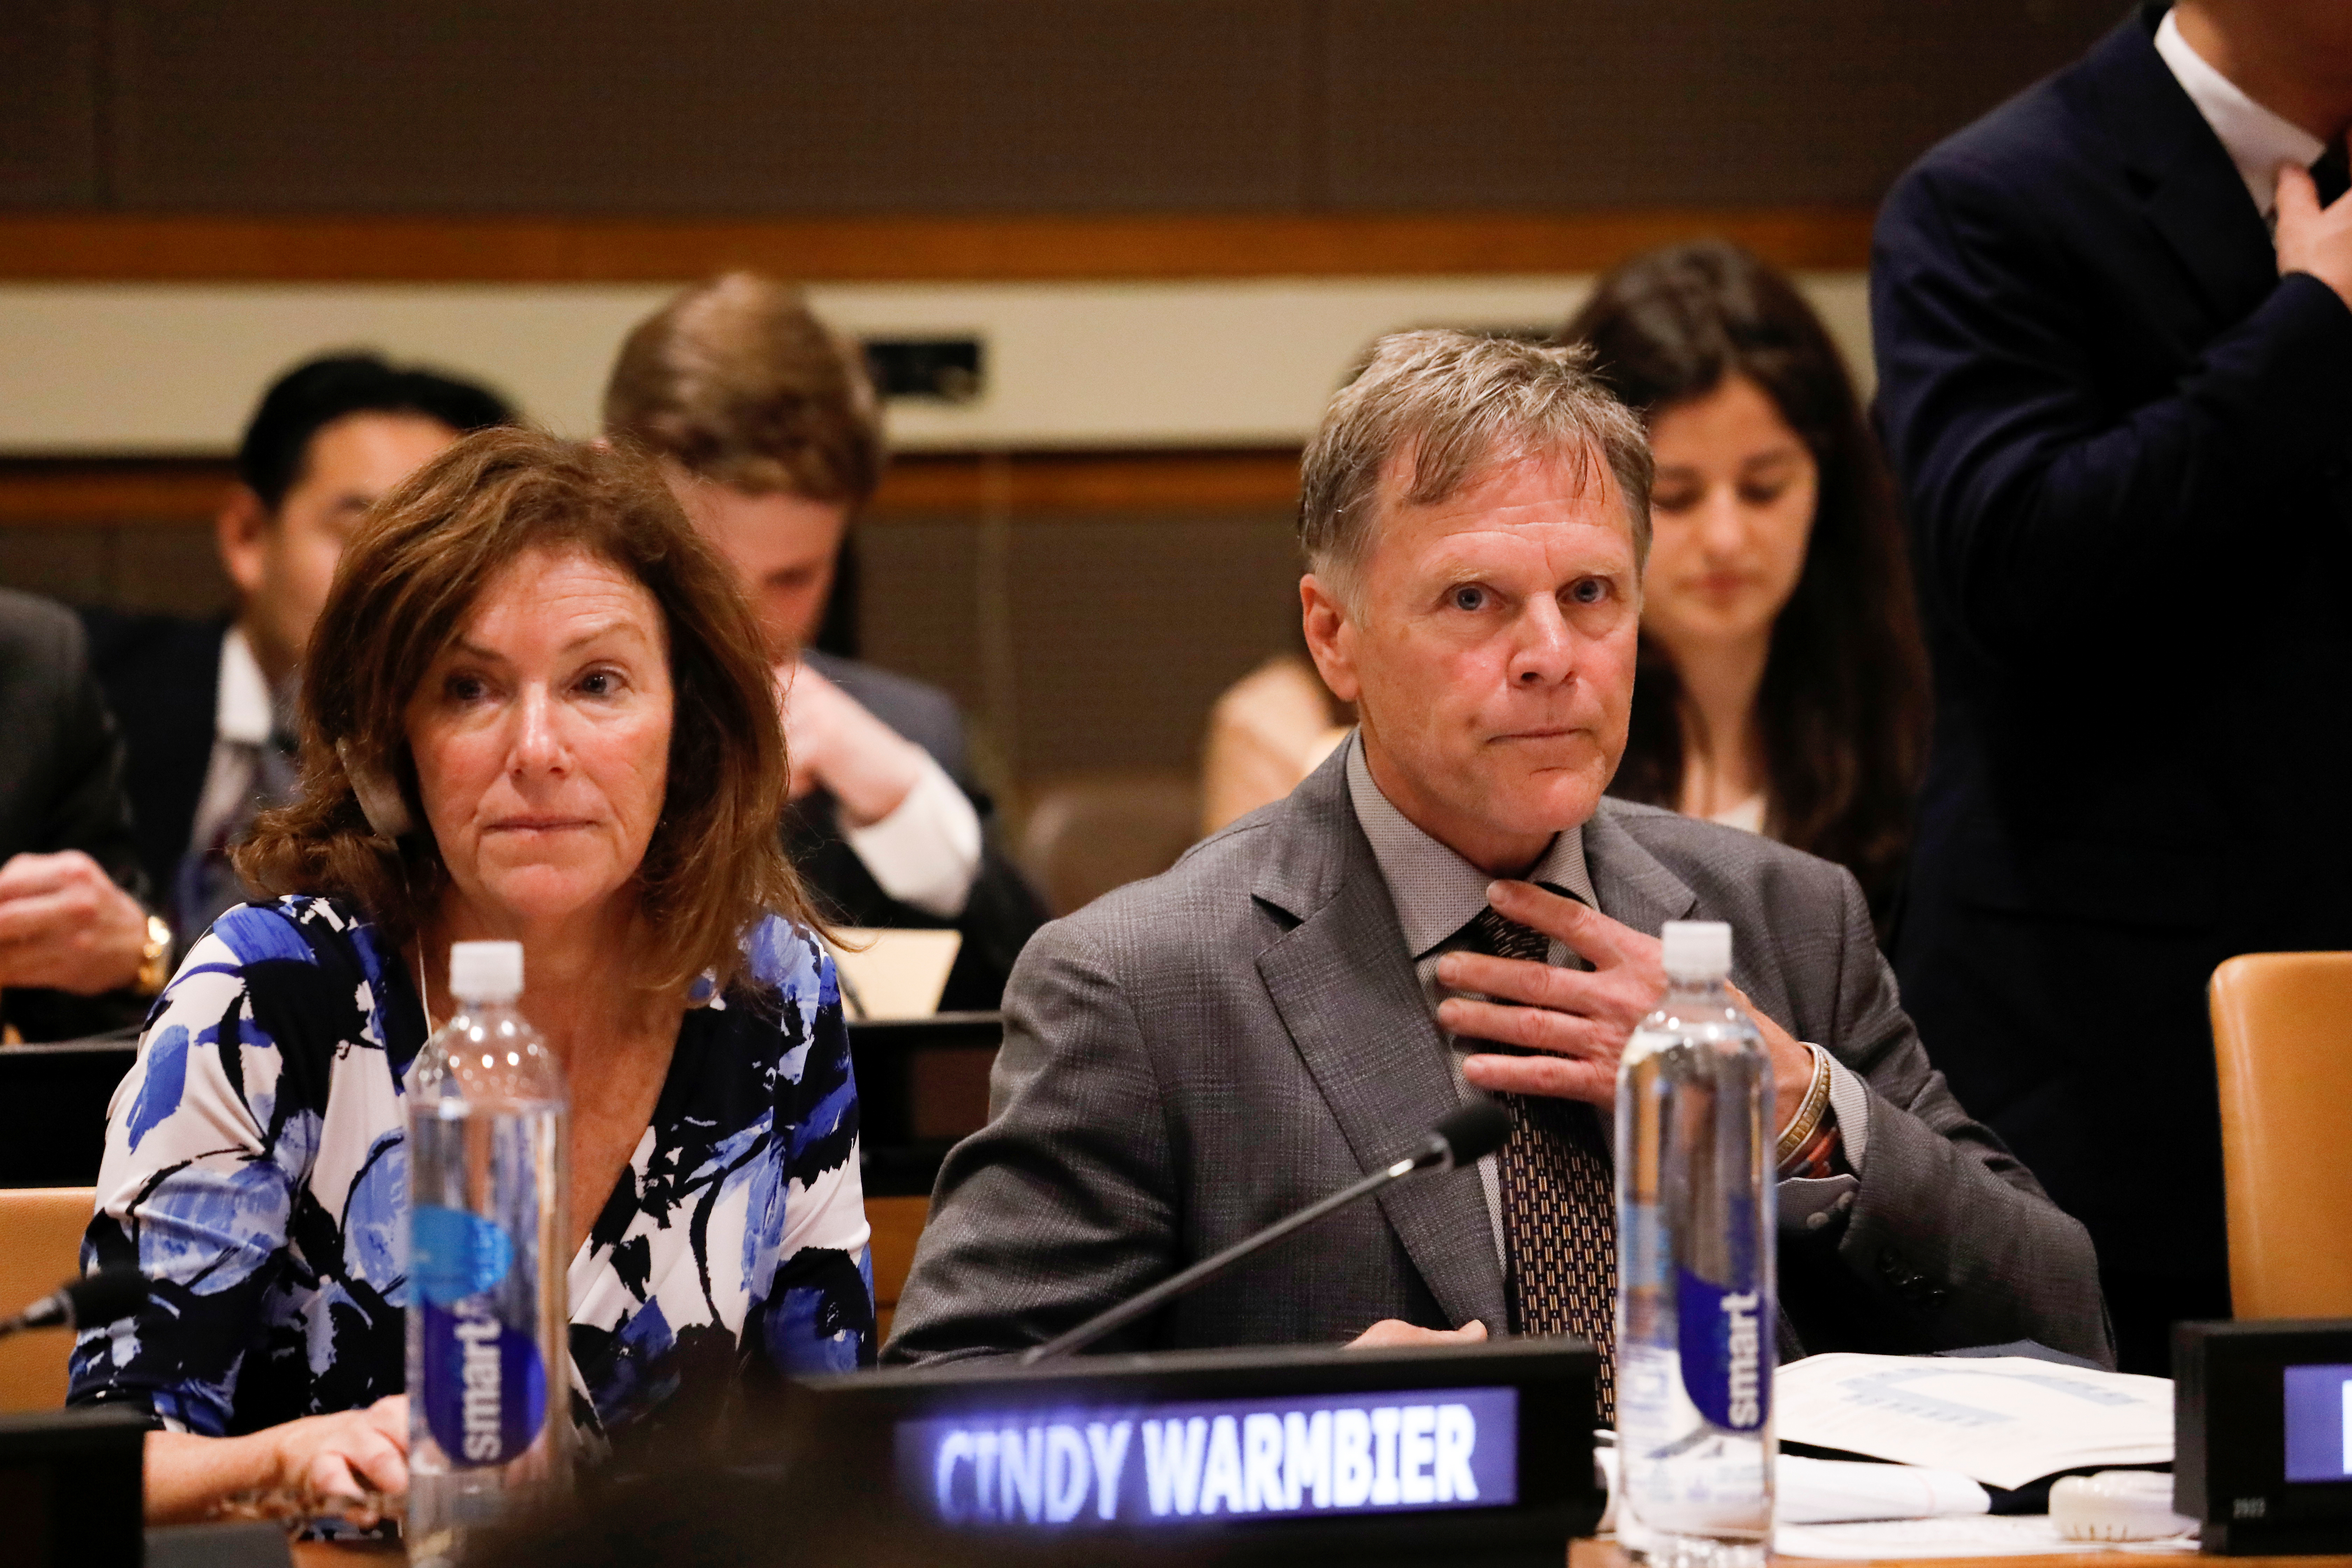 Fred Warmbier and his wife Cindy, parents of Otto Warmbier, attend a symposium on possible ways of international cooperation to urge the Democratic Republic of Korea (DPKR) to take concrete actions to improve the human rights situation in the DPRK at the United Nations headquarters in Manhattan, New York, U.S., May 3, 2018. REUTERS/Shannon Stapleton